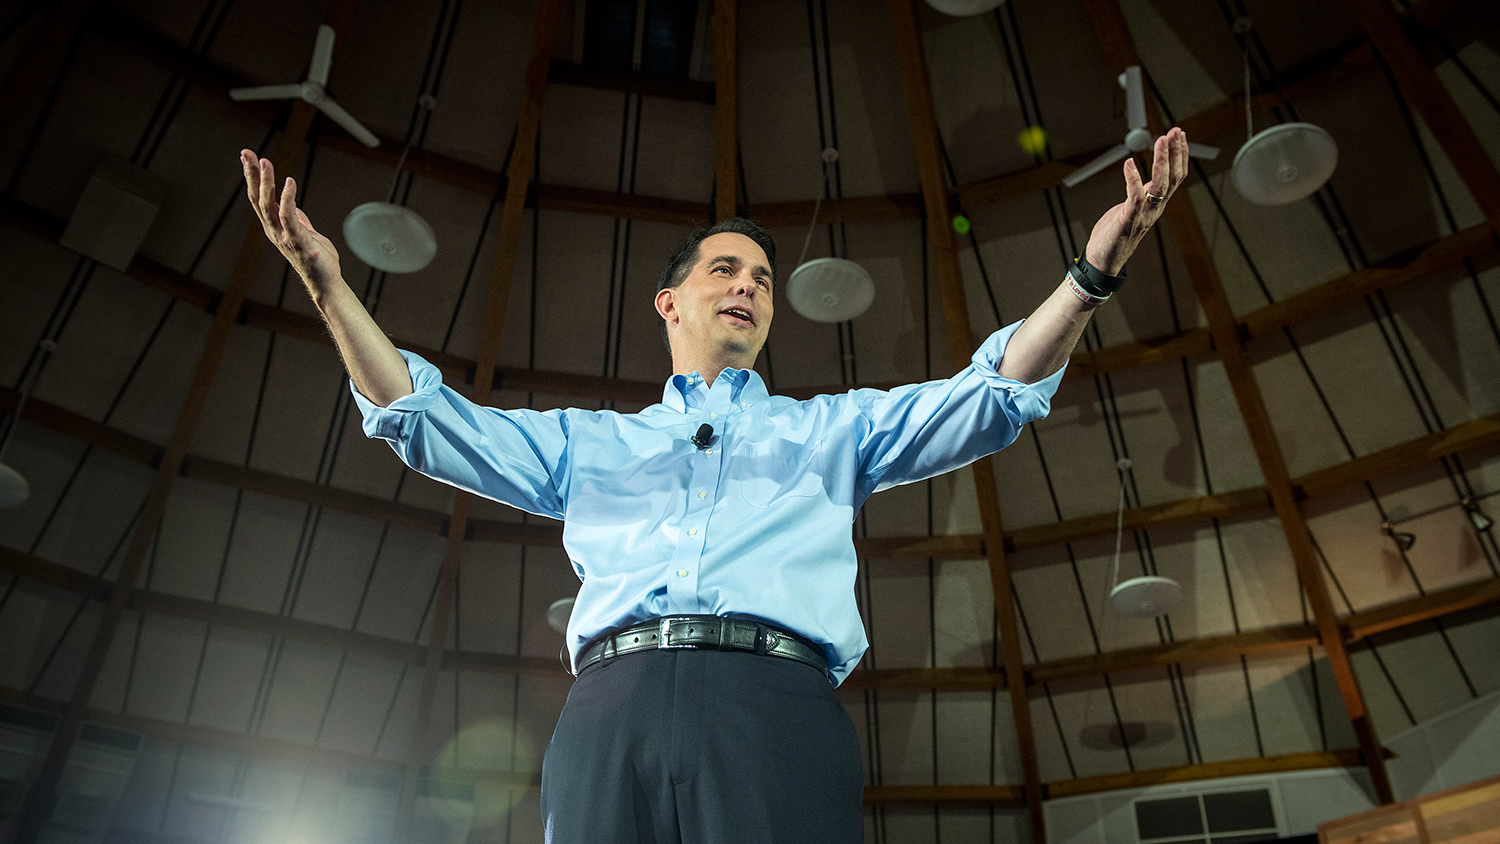 Scott Walker, governor of Wisconsin, speaks during his presidential campaign announcement in Waukesha, Wisconsin, U.S., on Monday, July 13, 2015.
